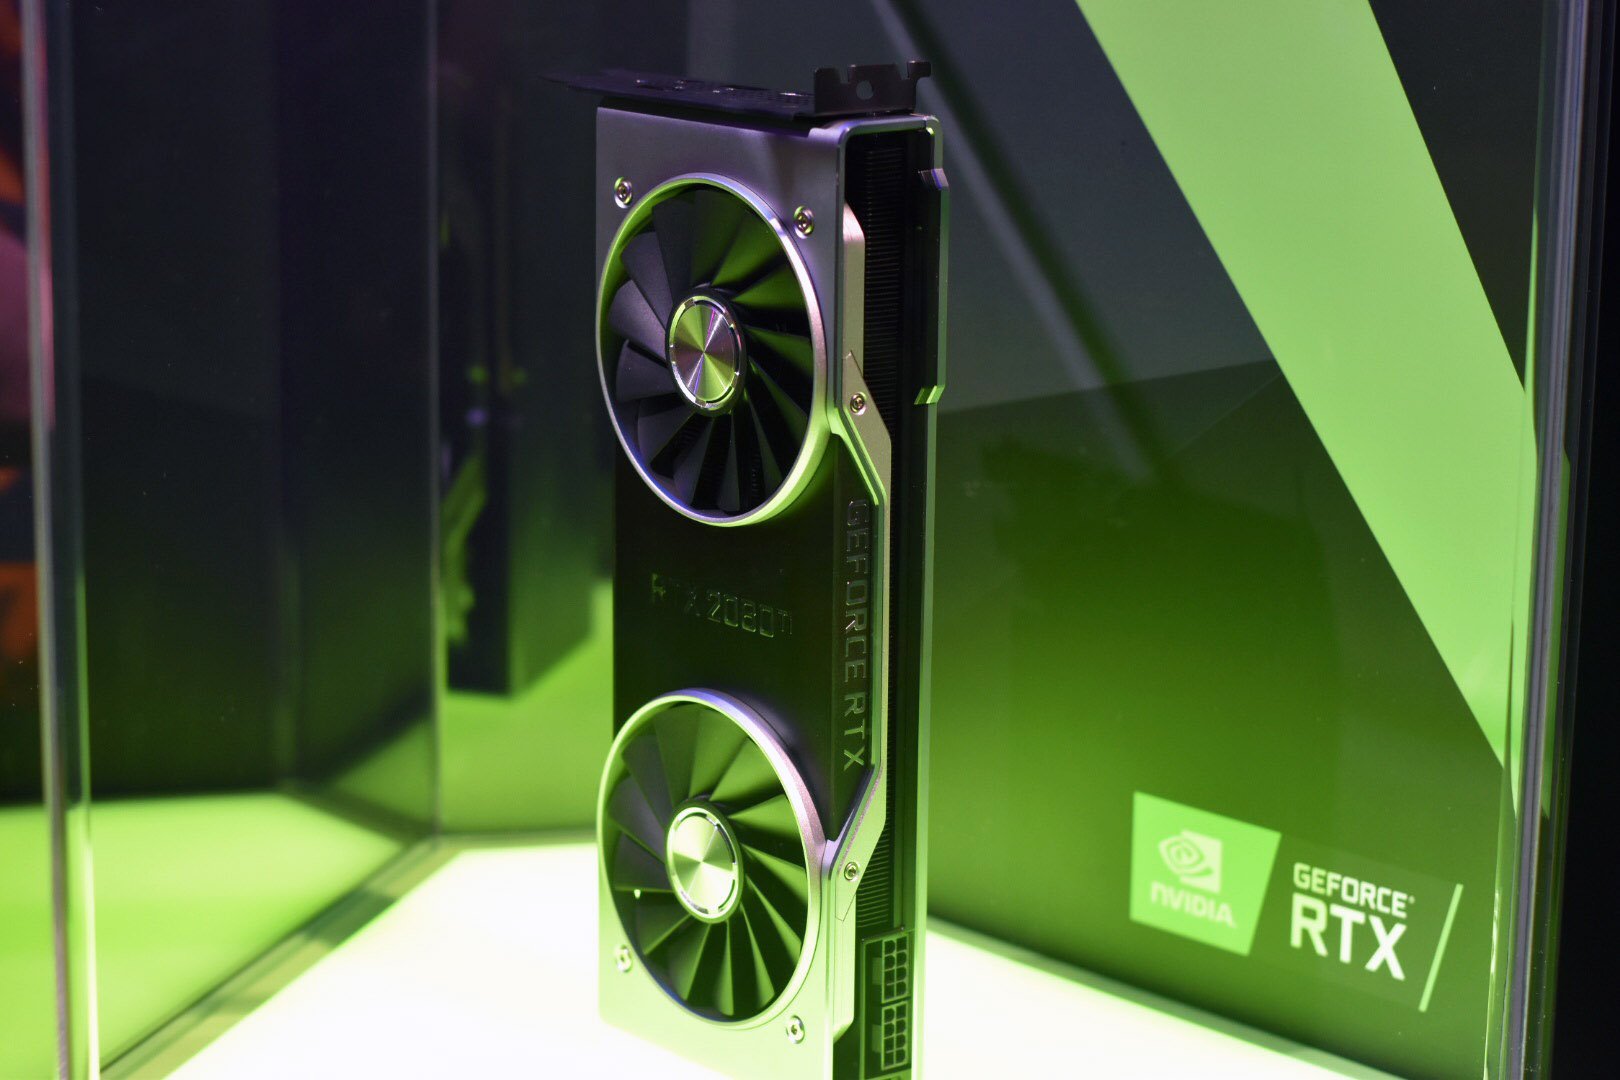 Revisiting the GeForce GTX 1080 Ti in 2022